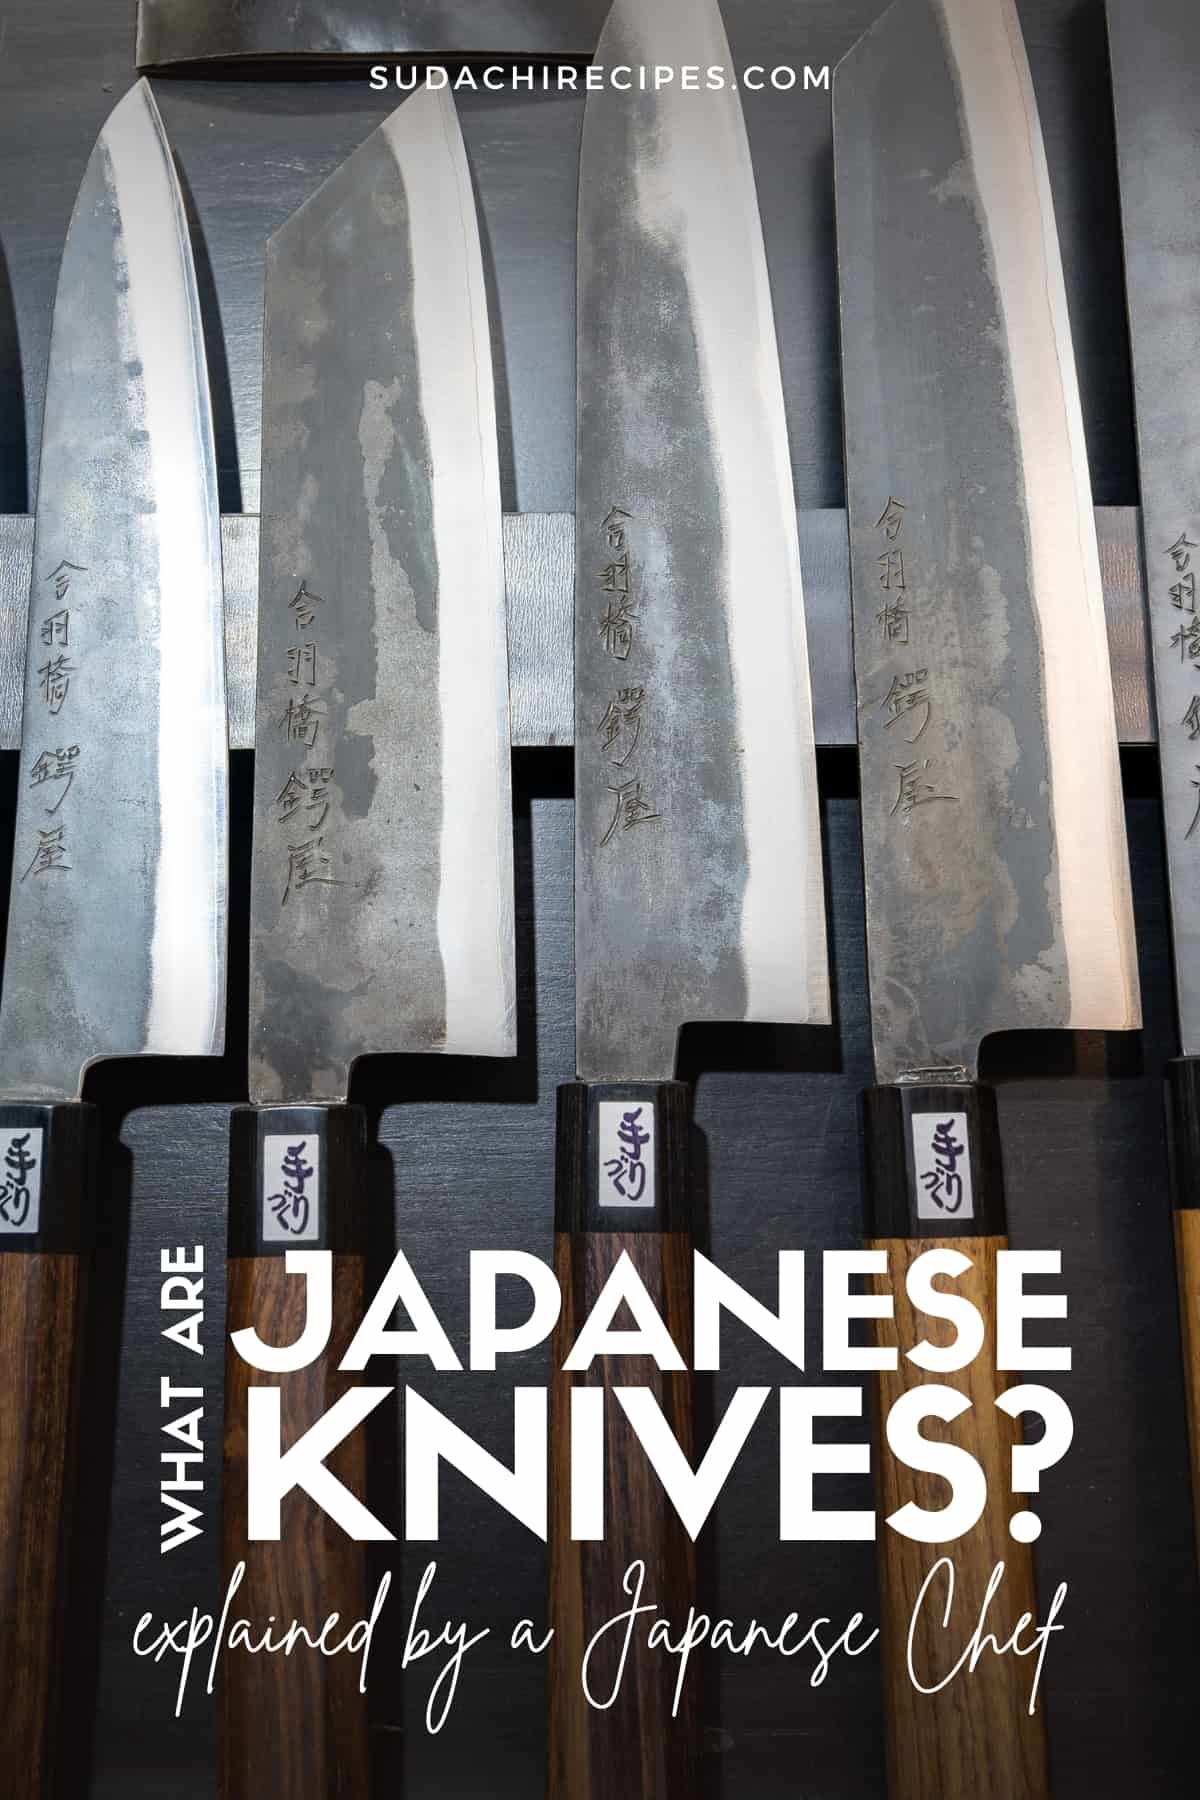 What are Japanese knives? Explained by a Japanese Chef